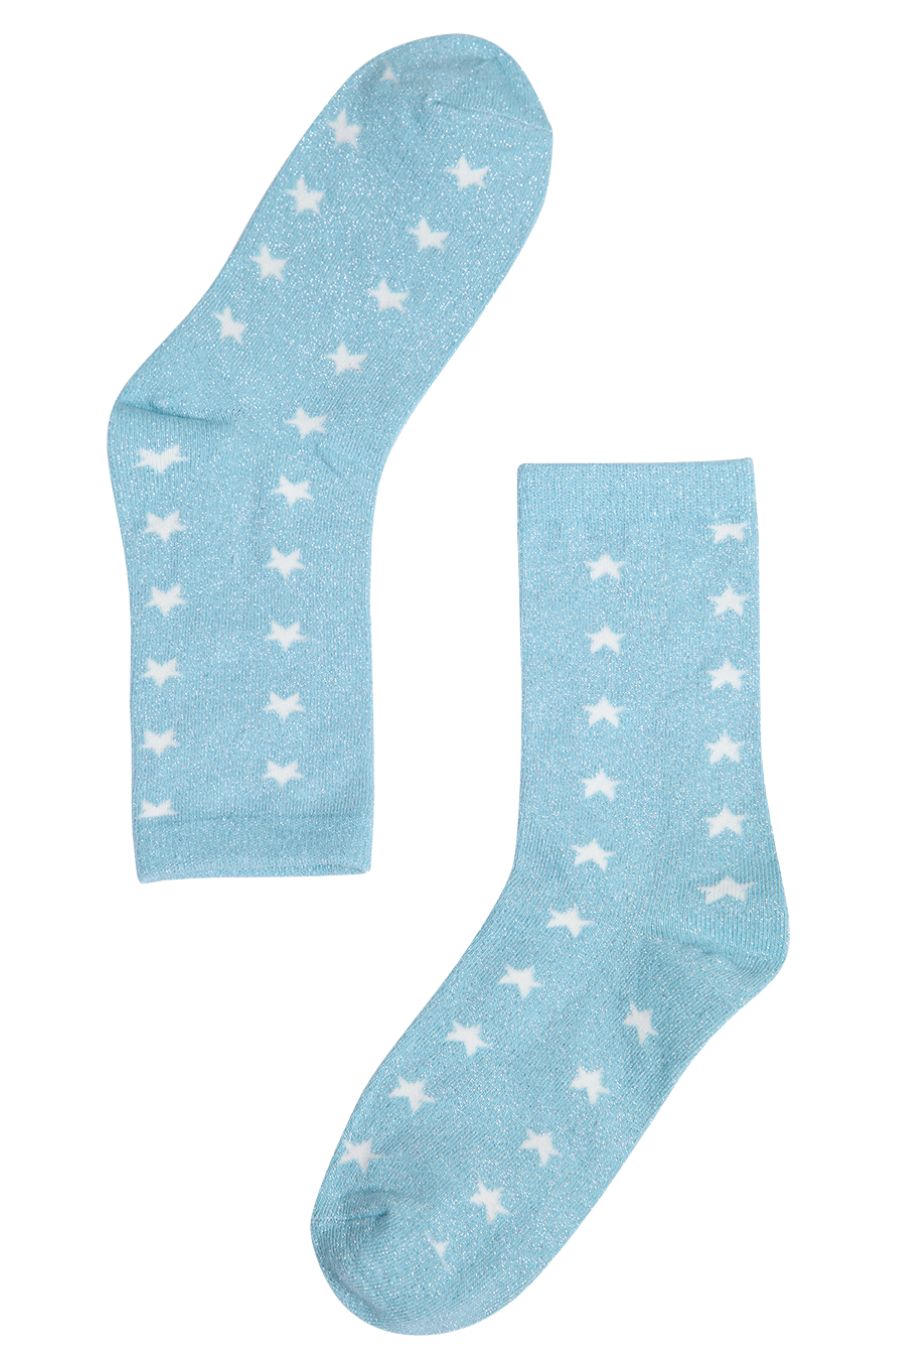 blue and silver glitter sparkly ankle socks with an all over star print